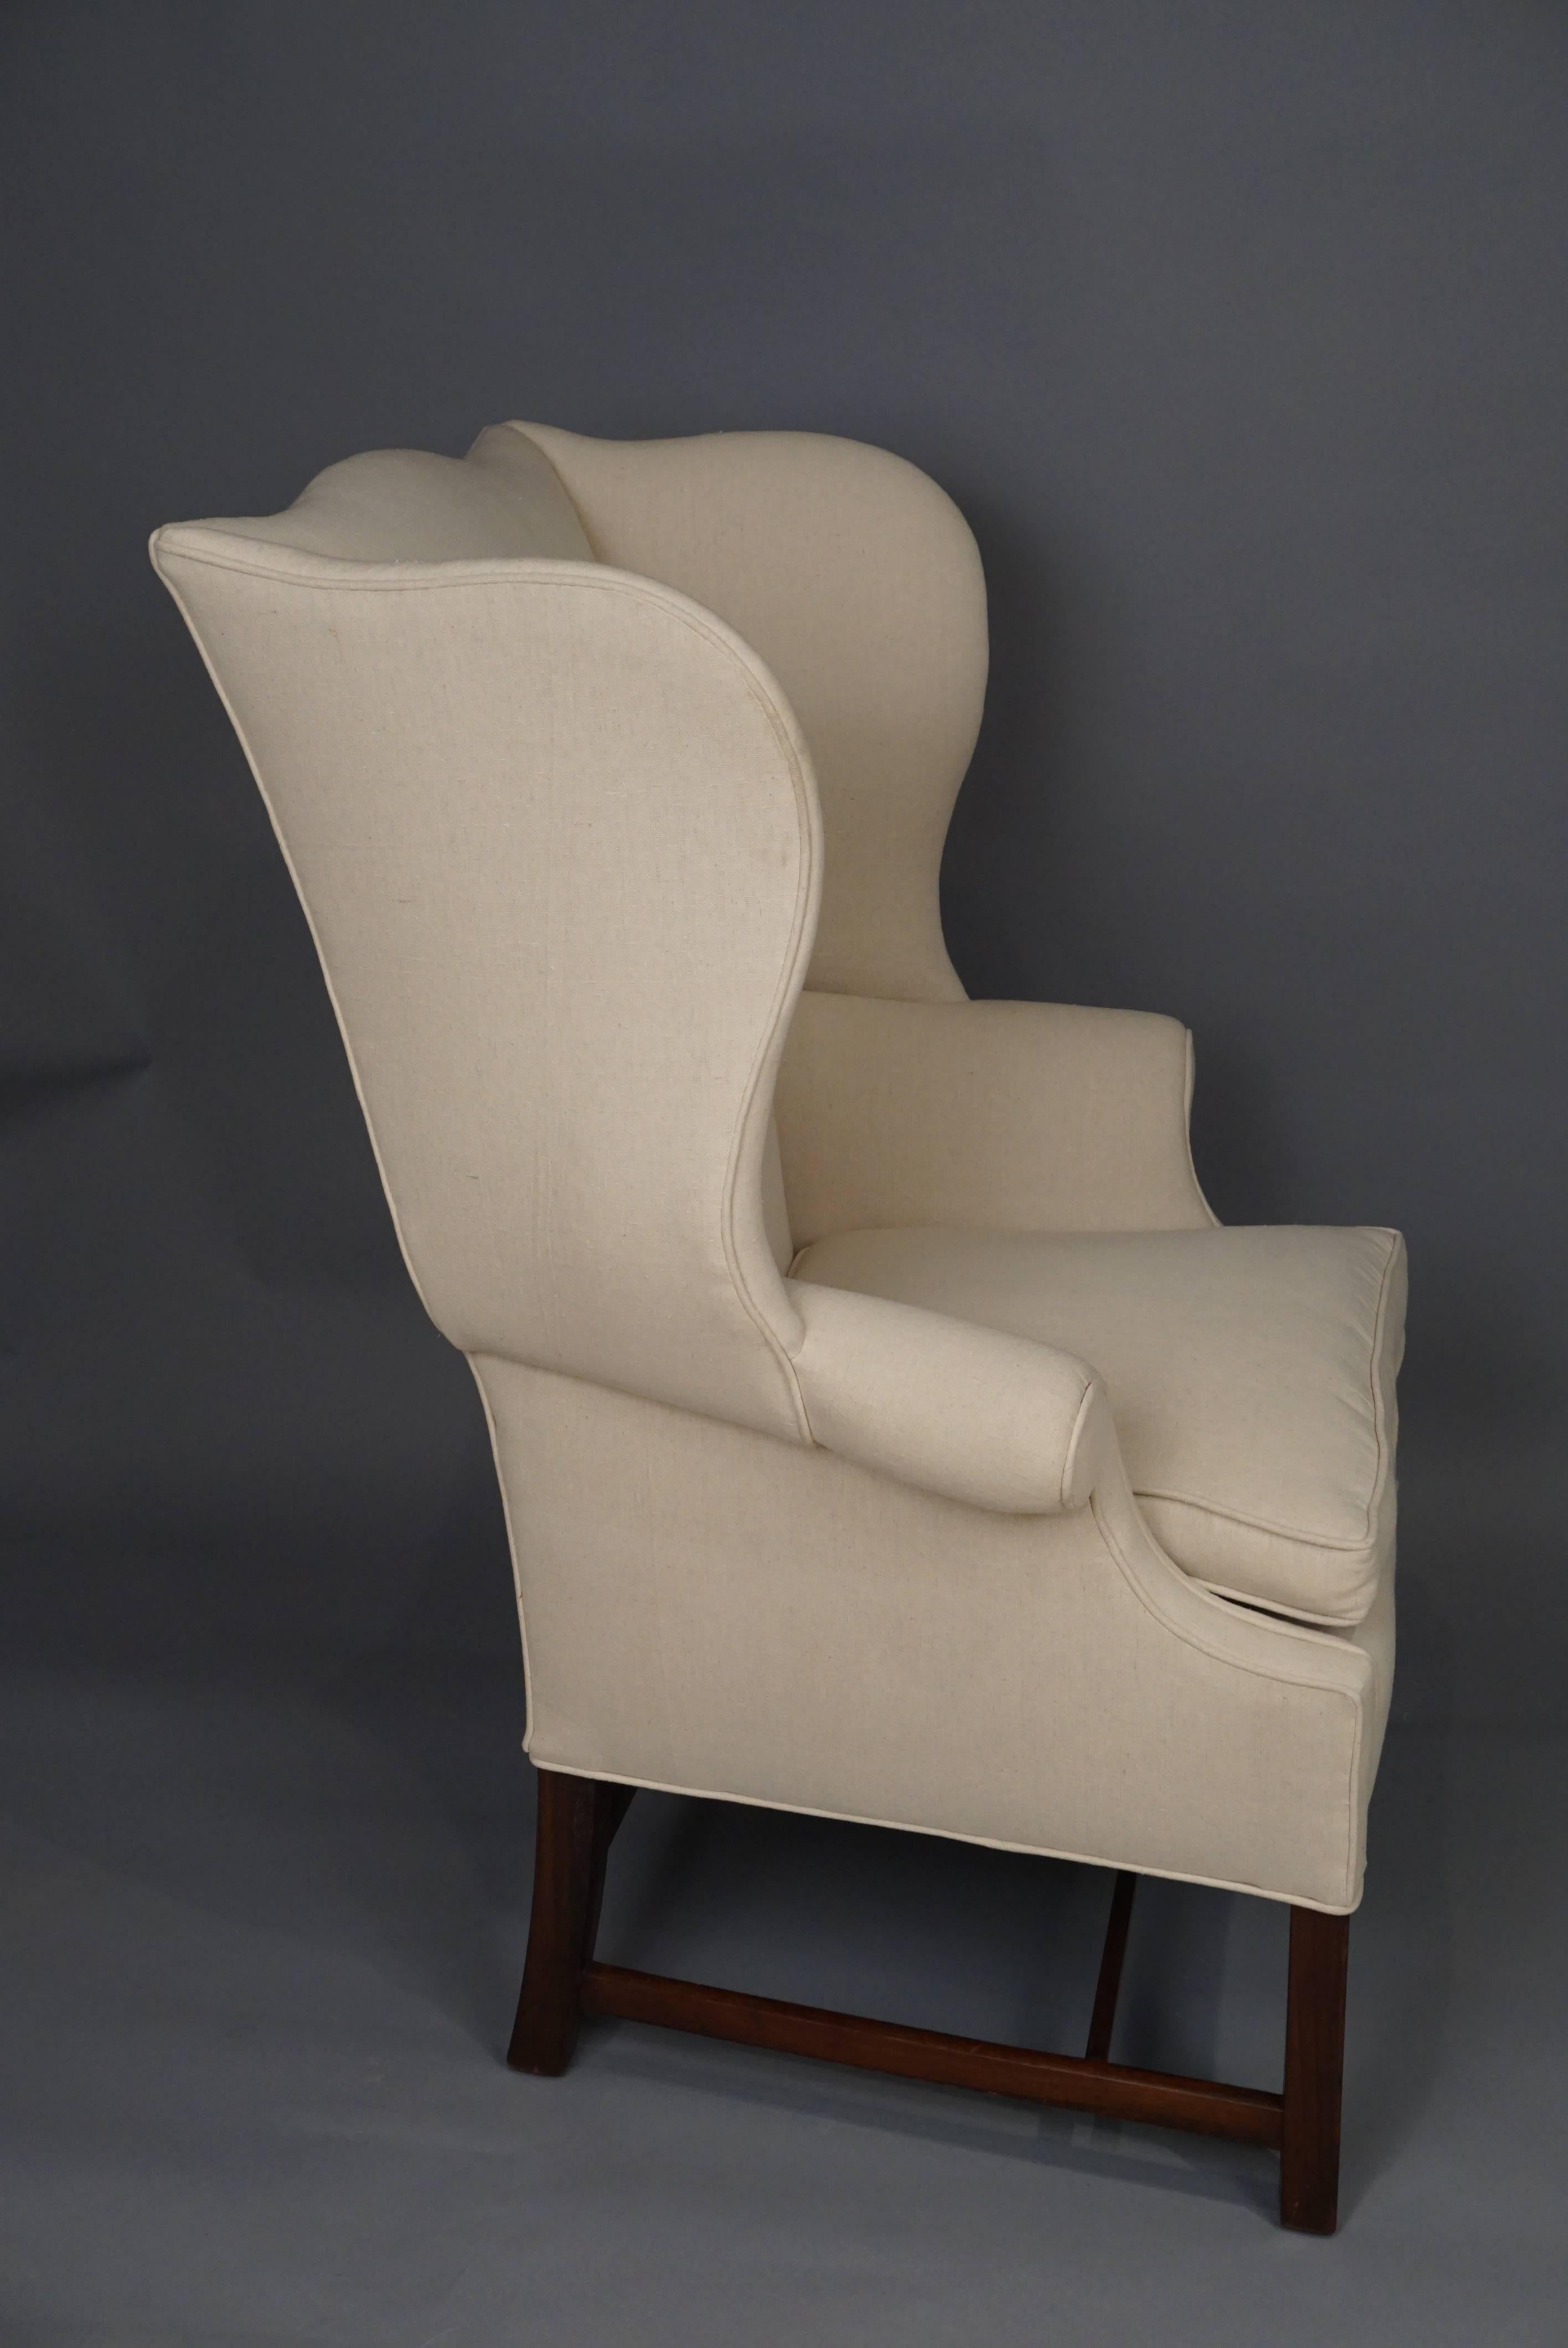 American Classical 19th Century Wingback Chair